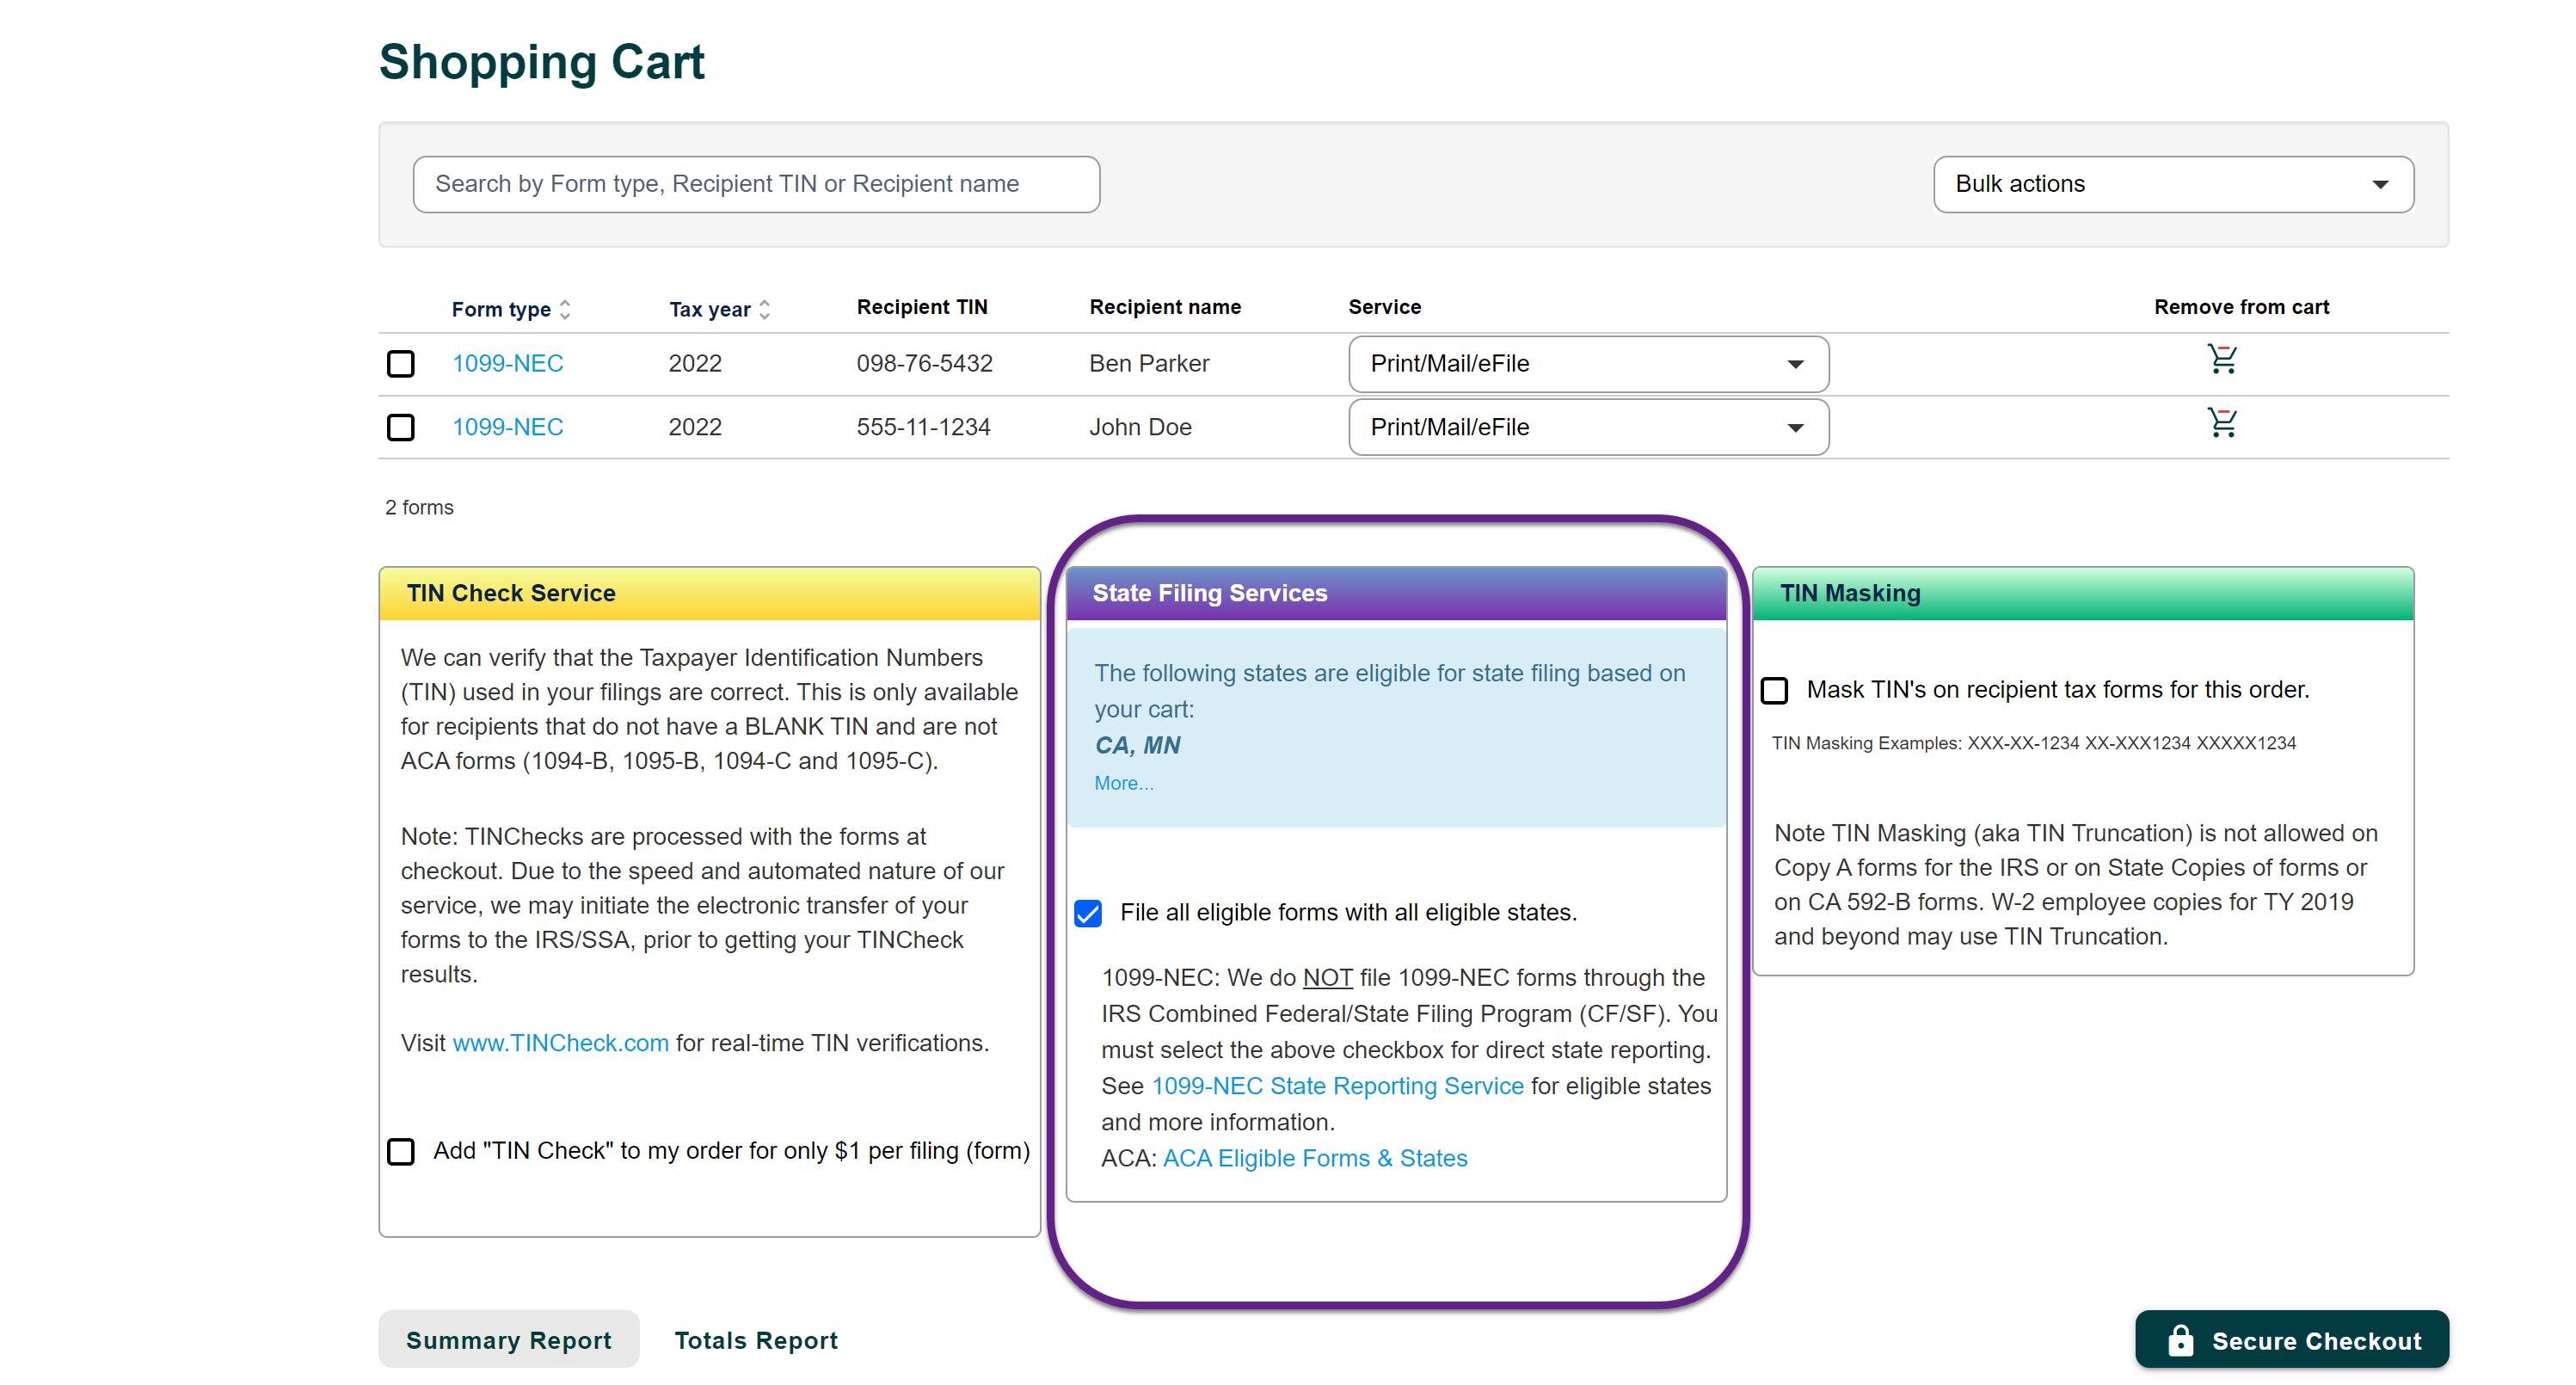 Image of the Shopping Cart page with a callout on the State Filing Services box.